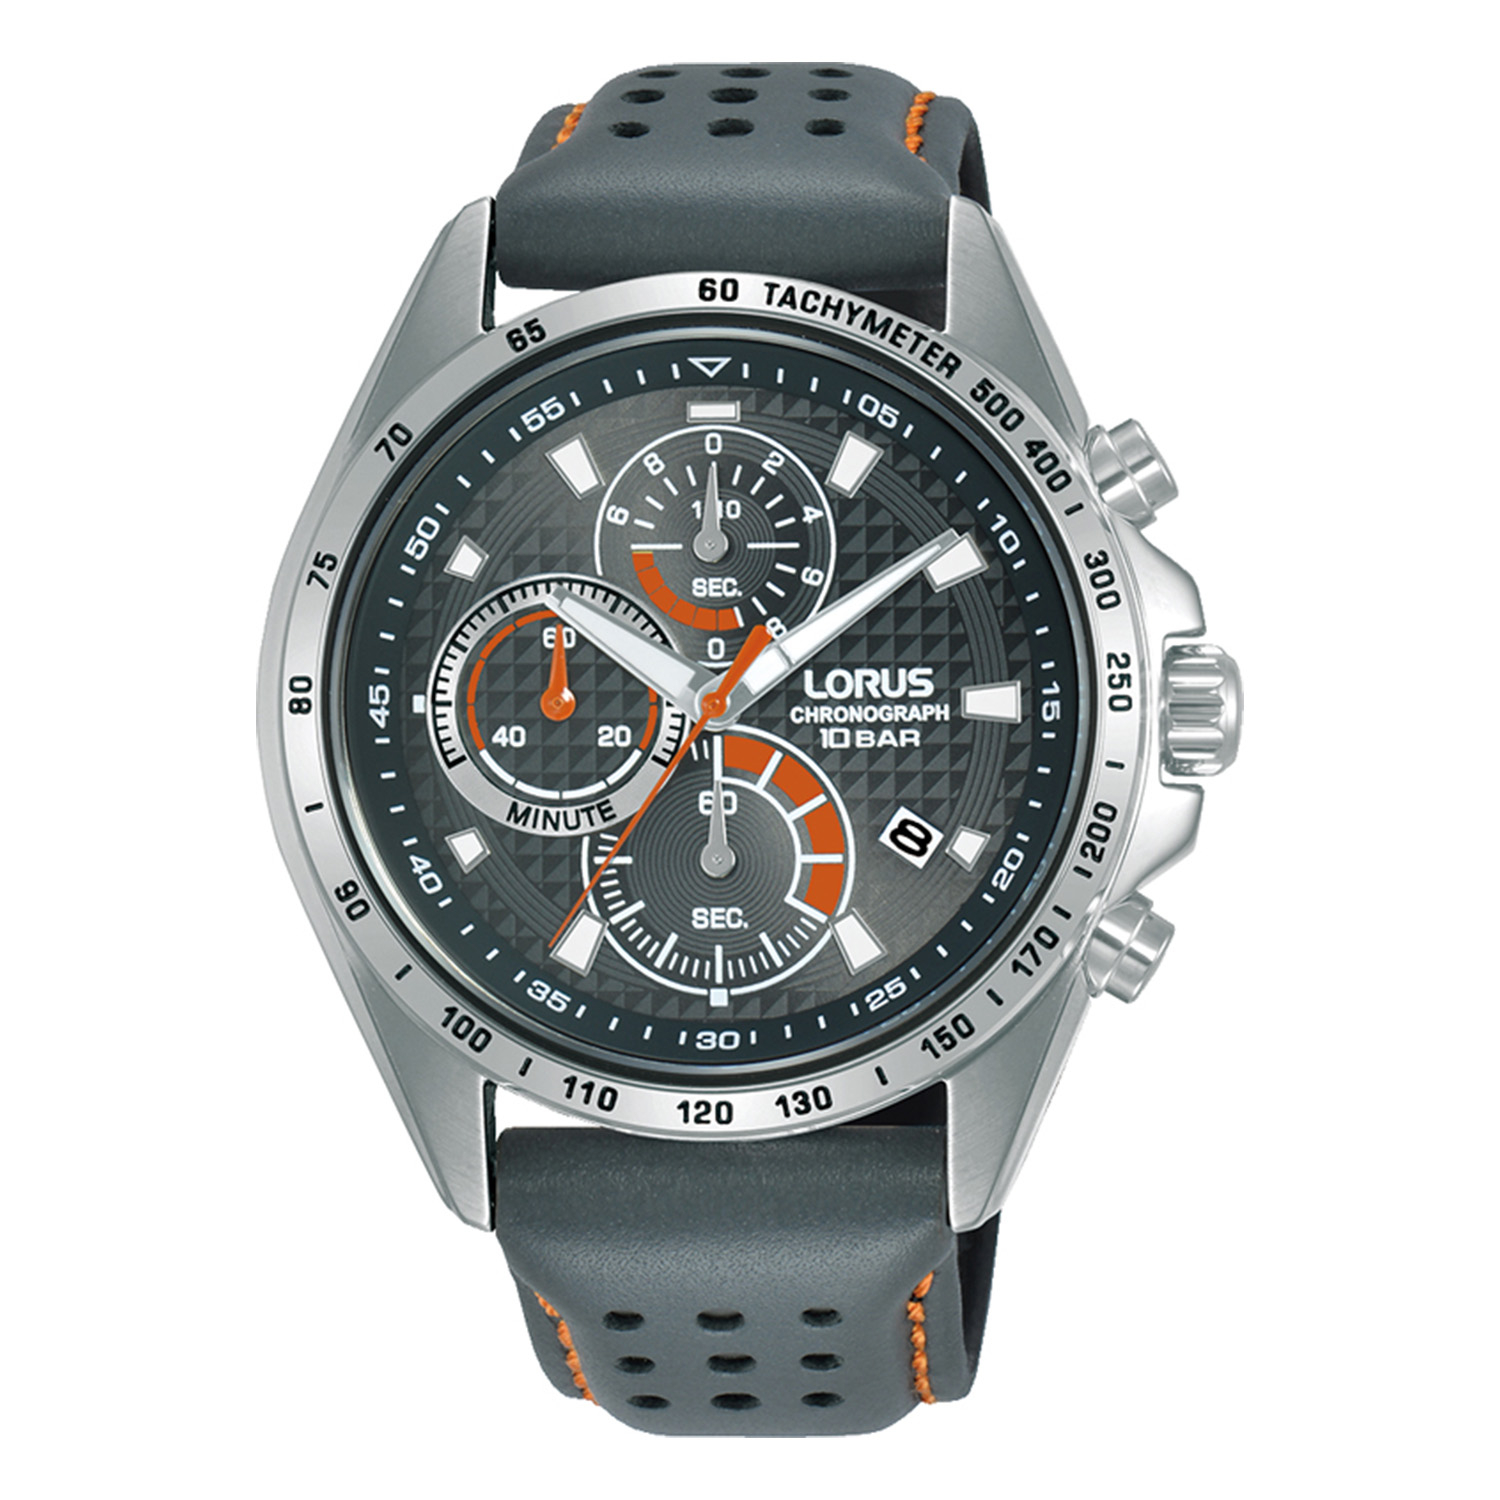 Mens Lorus Chronograph Watch with grey dial and grey leather strap.